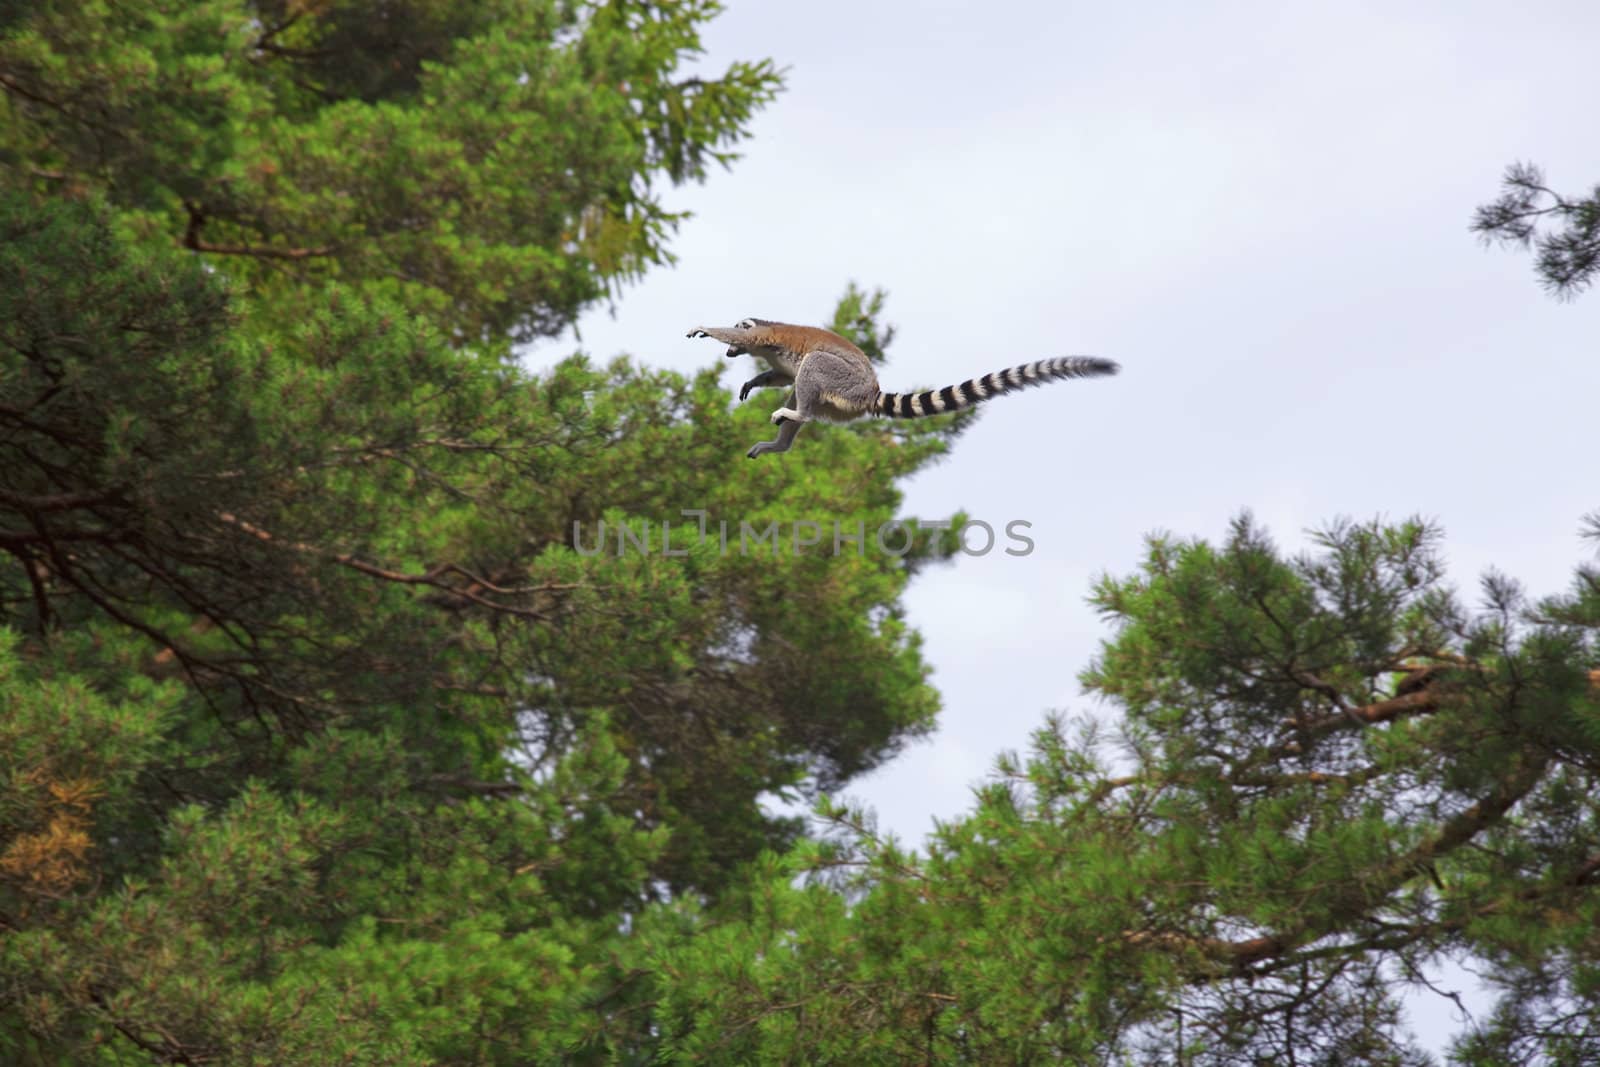 A ring-tailed lemur jumping in the trees